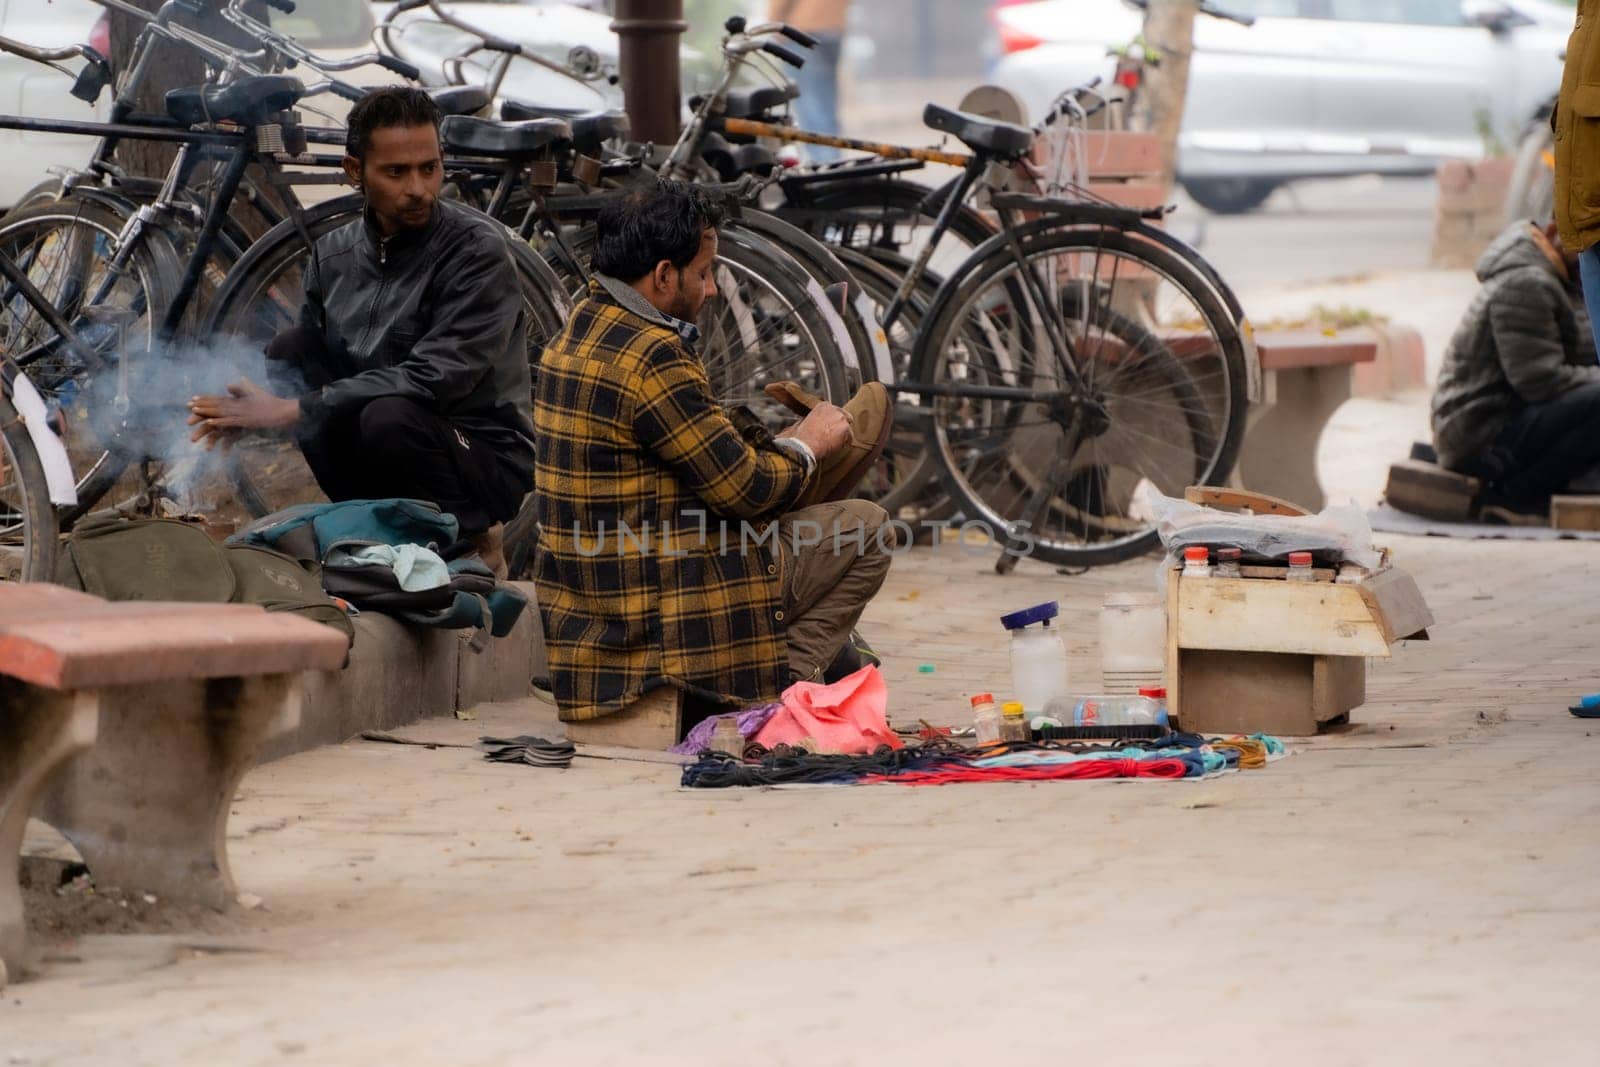 street side cobbler sitting on road and mending shoes in the winter months in sector 17 chandigarh during morning showing how the poor earn a living by Shalinimathur